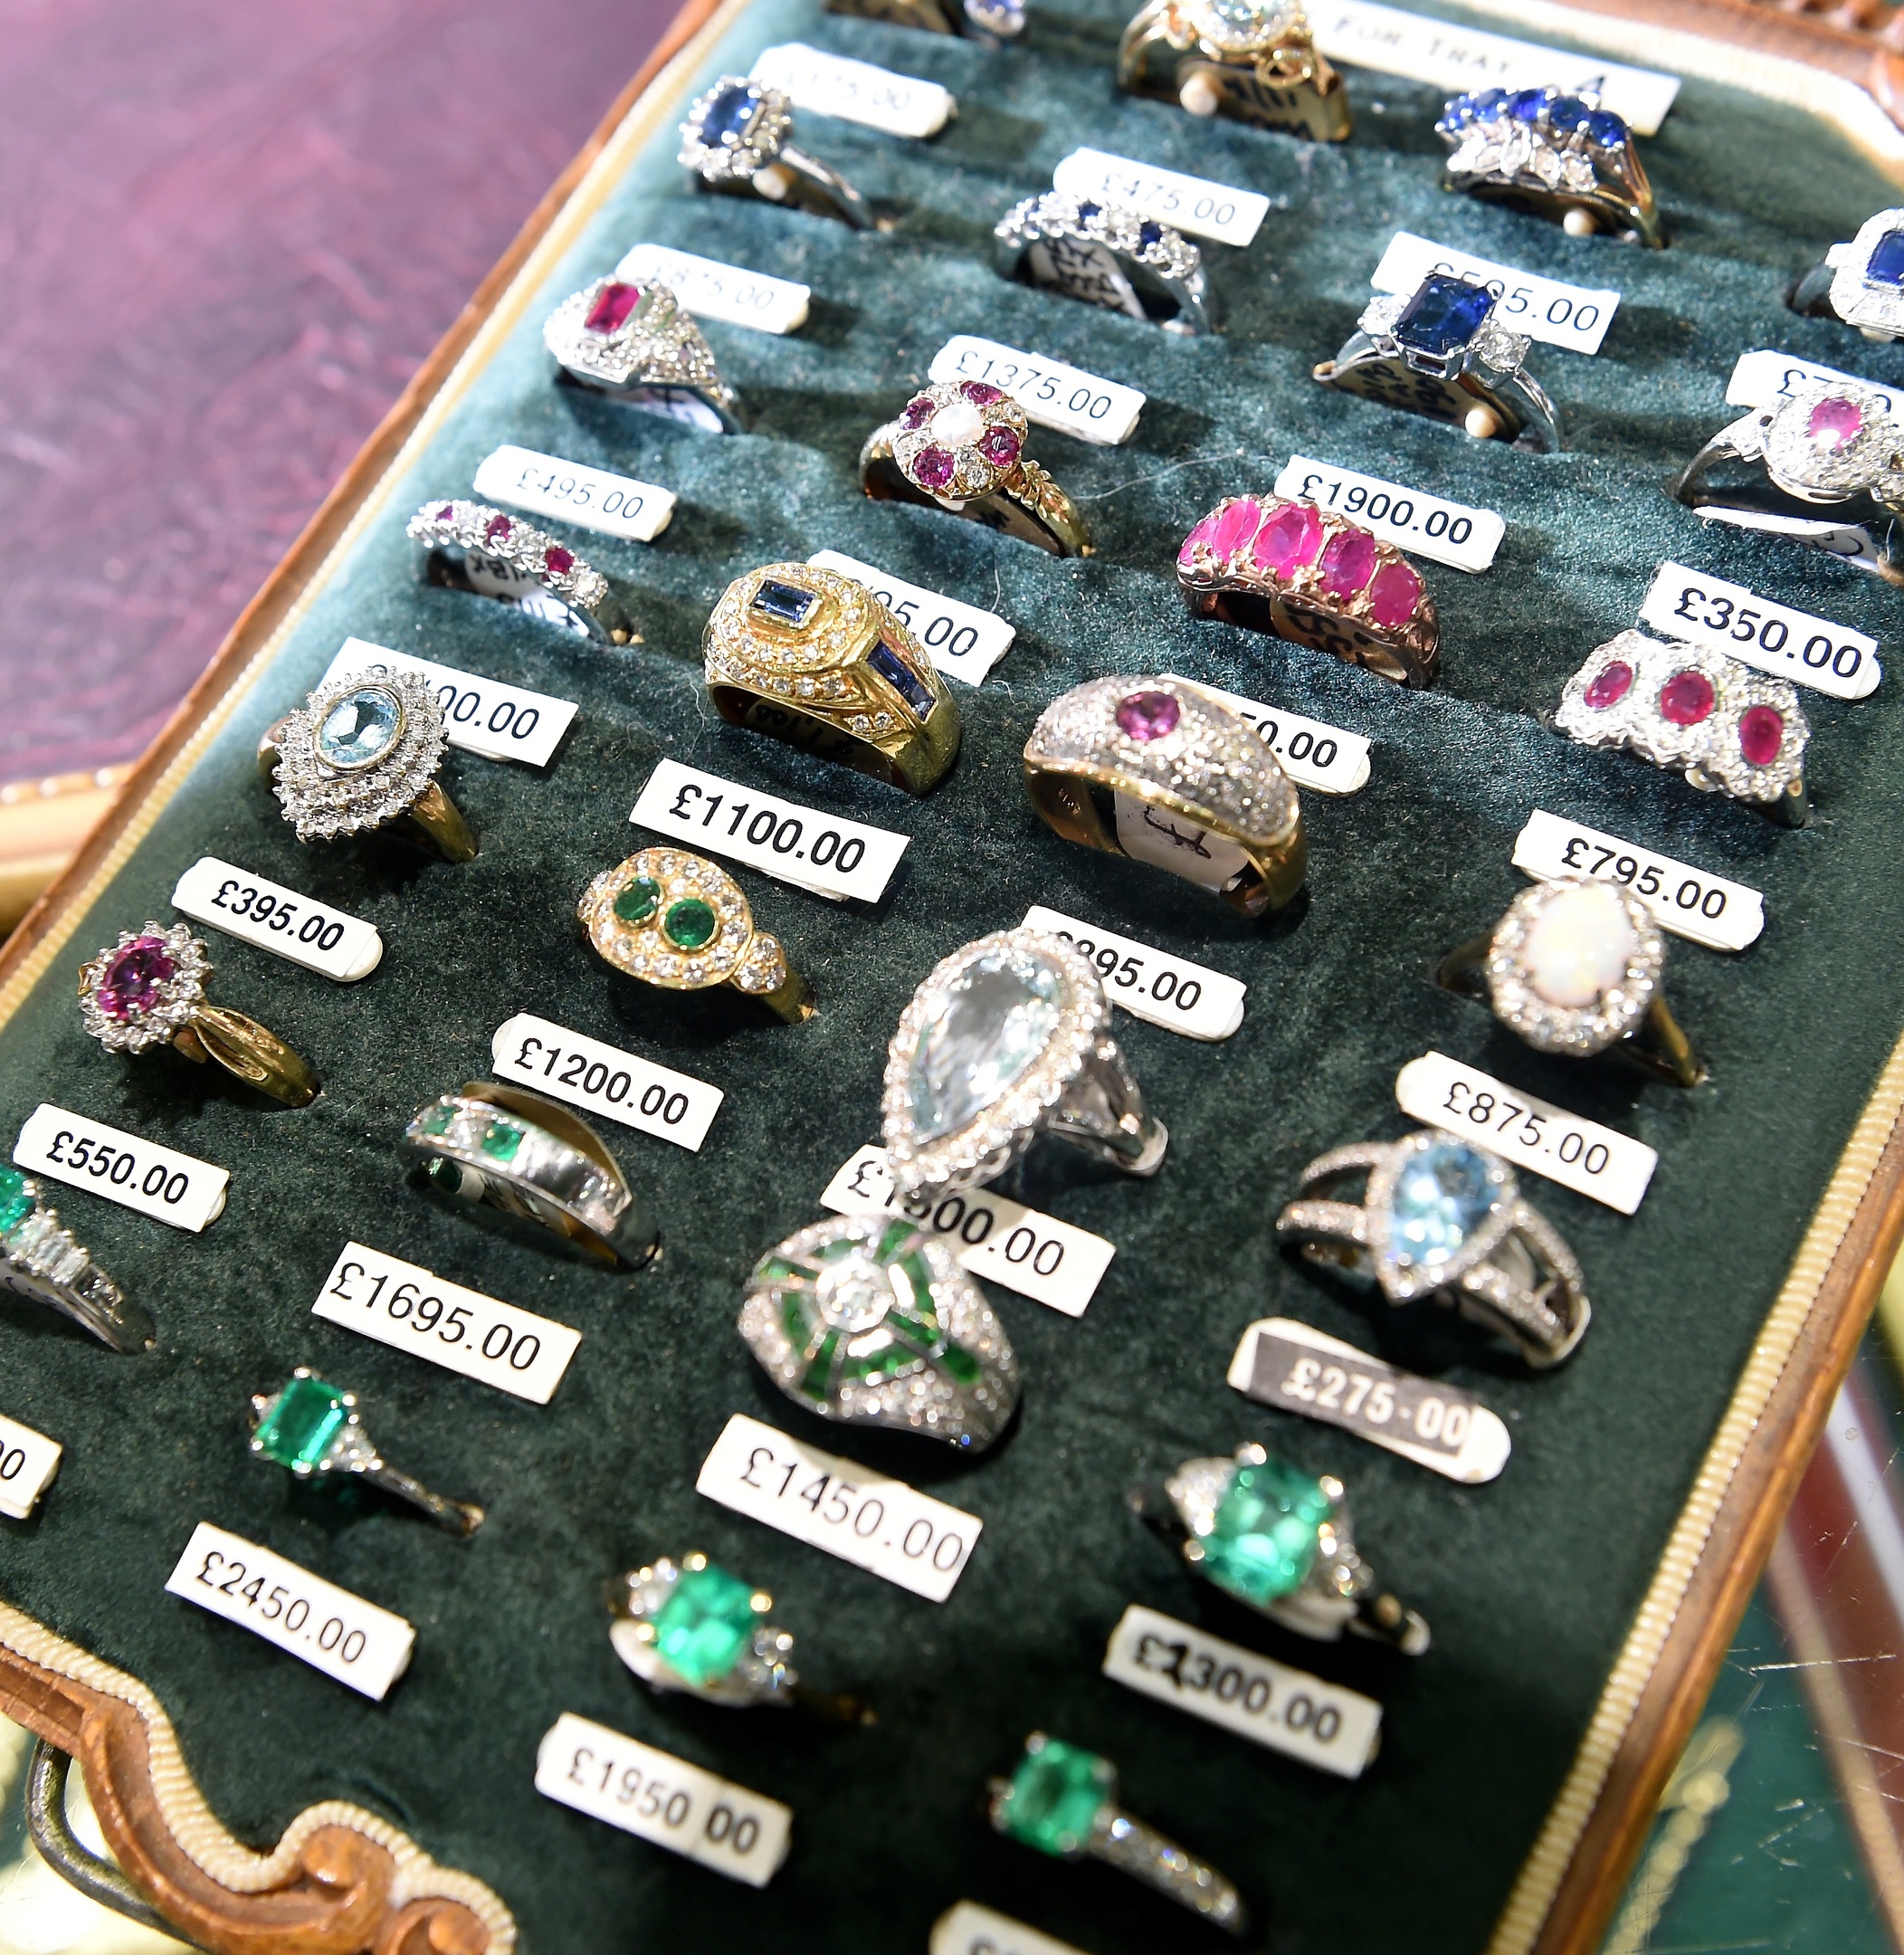 Fall in love with this range of rings at Willie Morrison